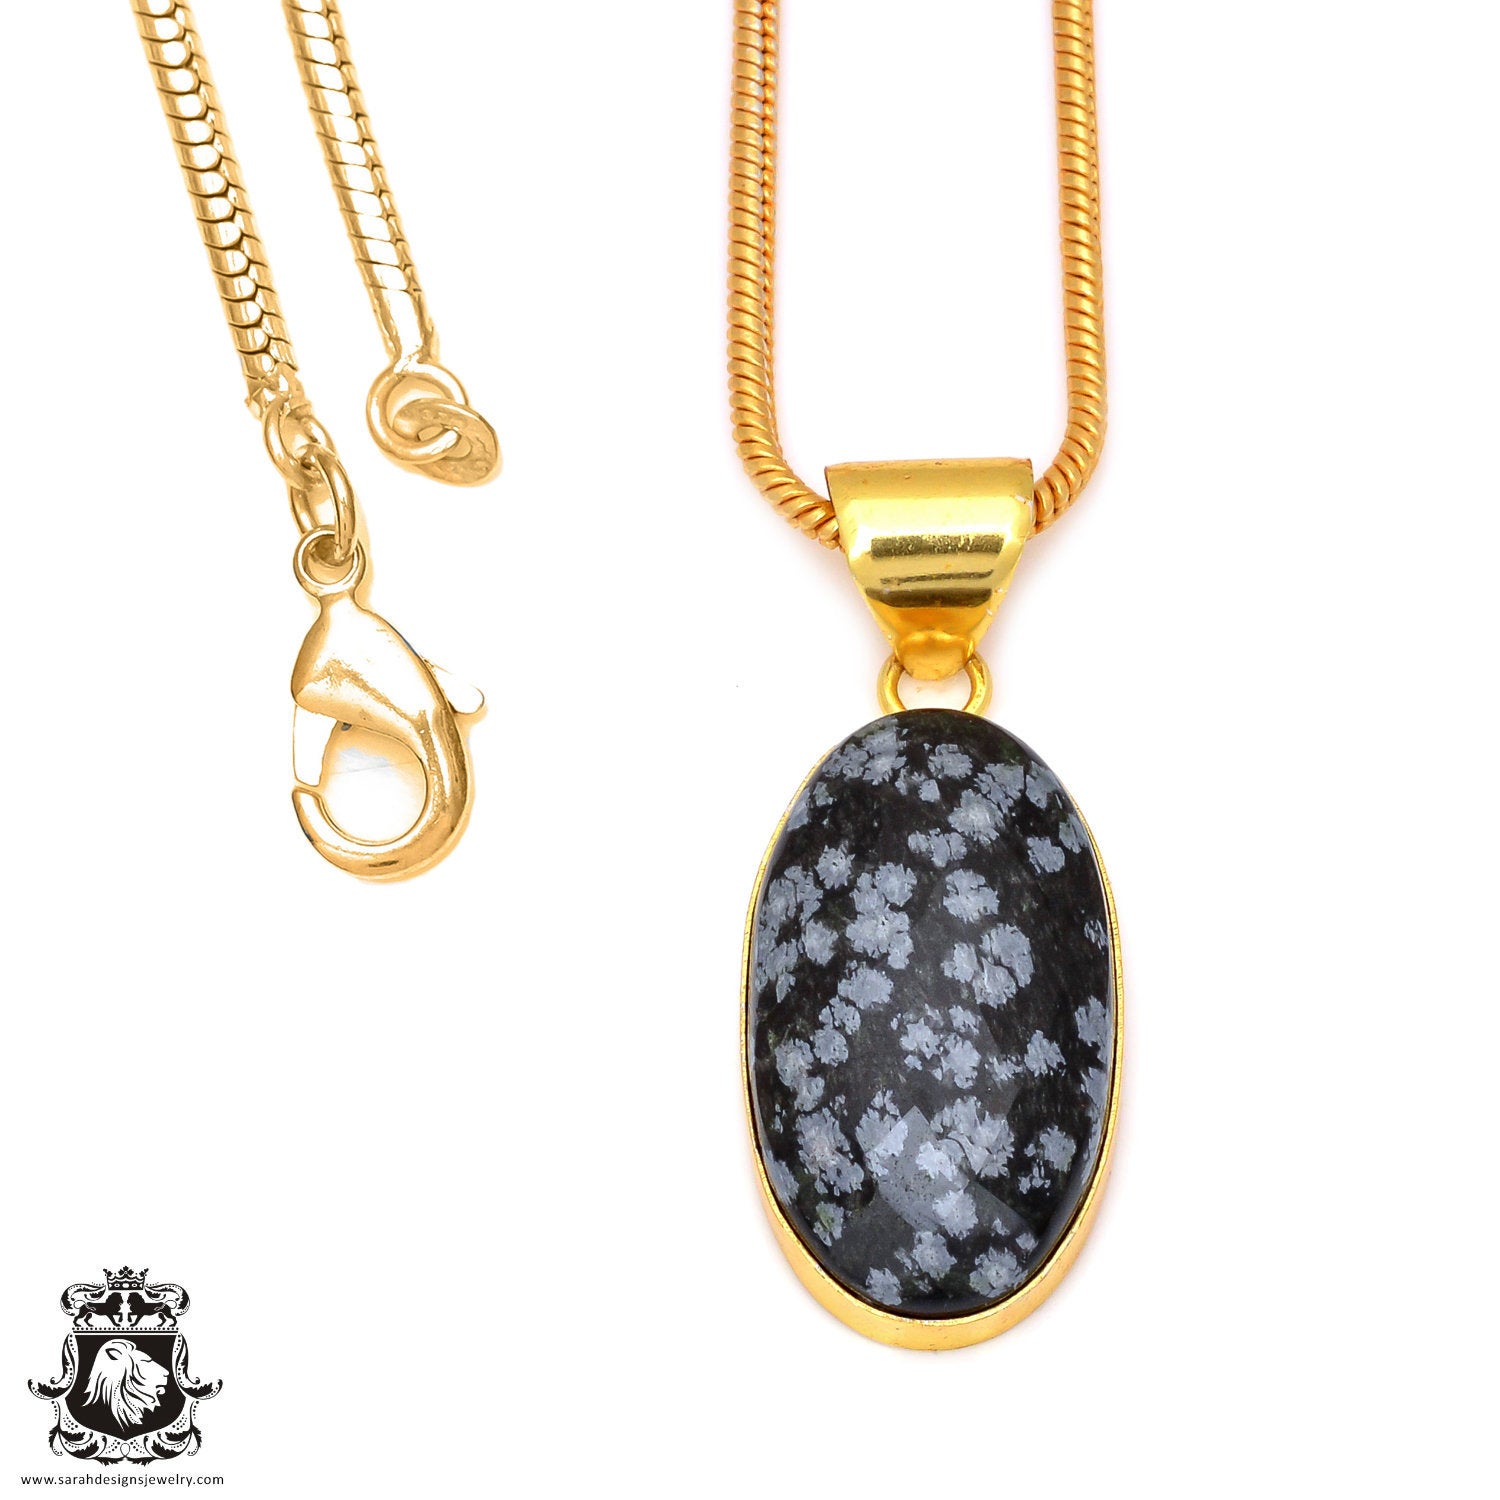 Snowflake Obsidian Pendant Necklaces & Free 3mm Italian 925 Sterling Silver Chain Gph88